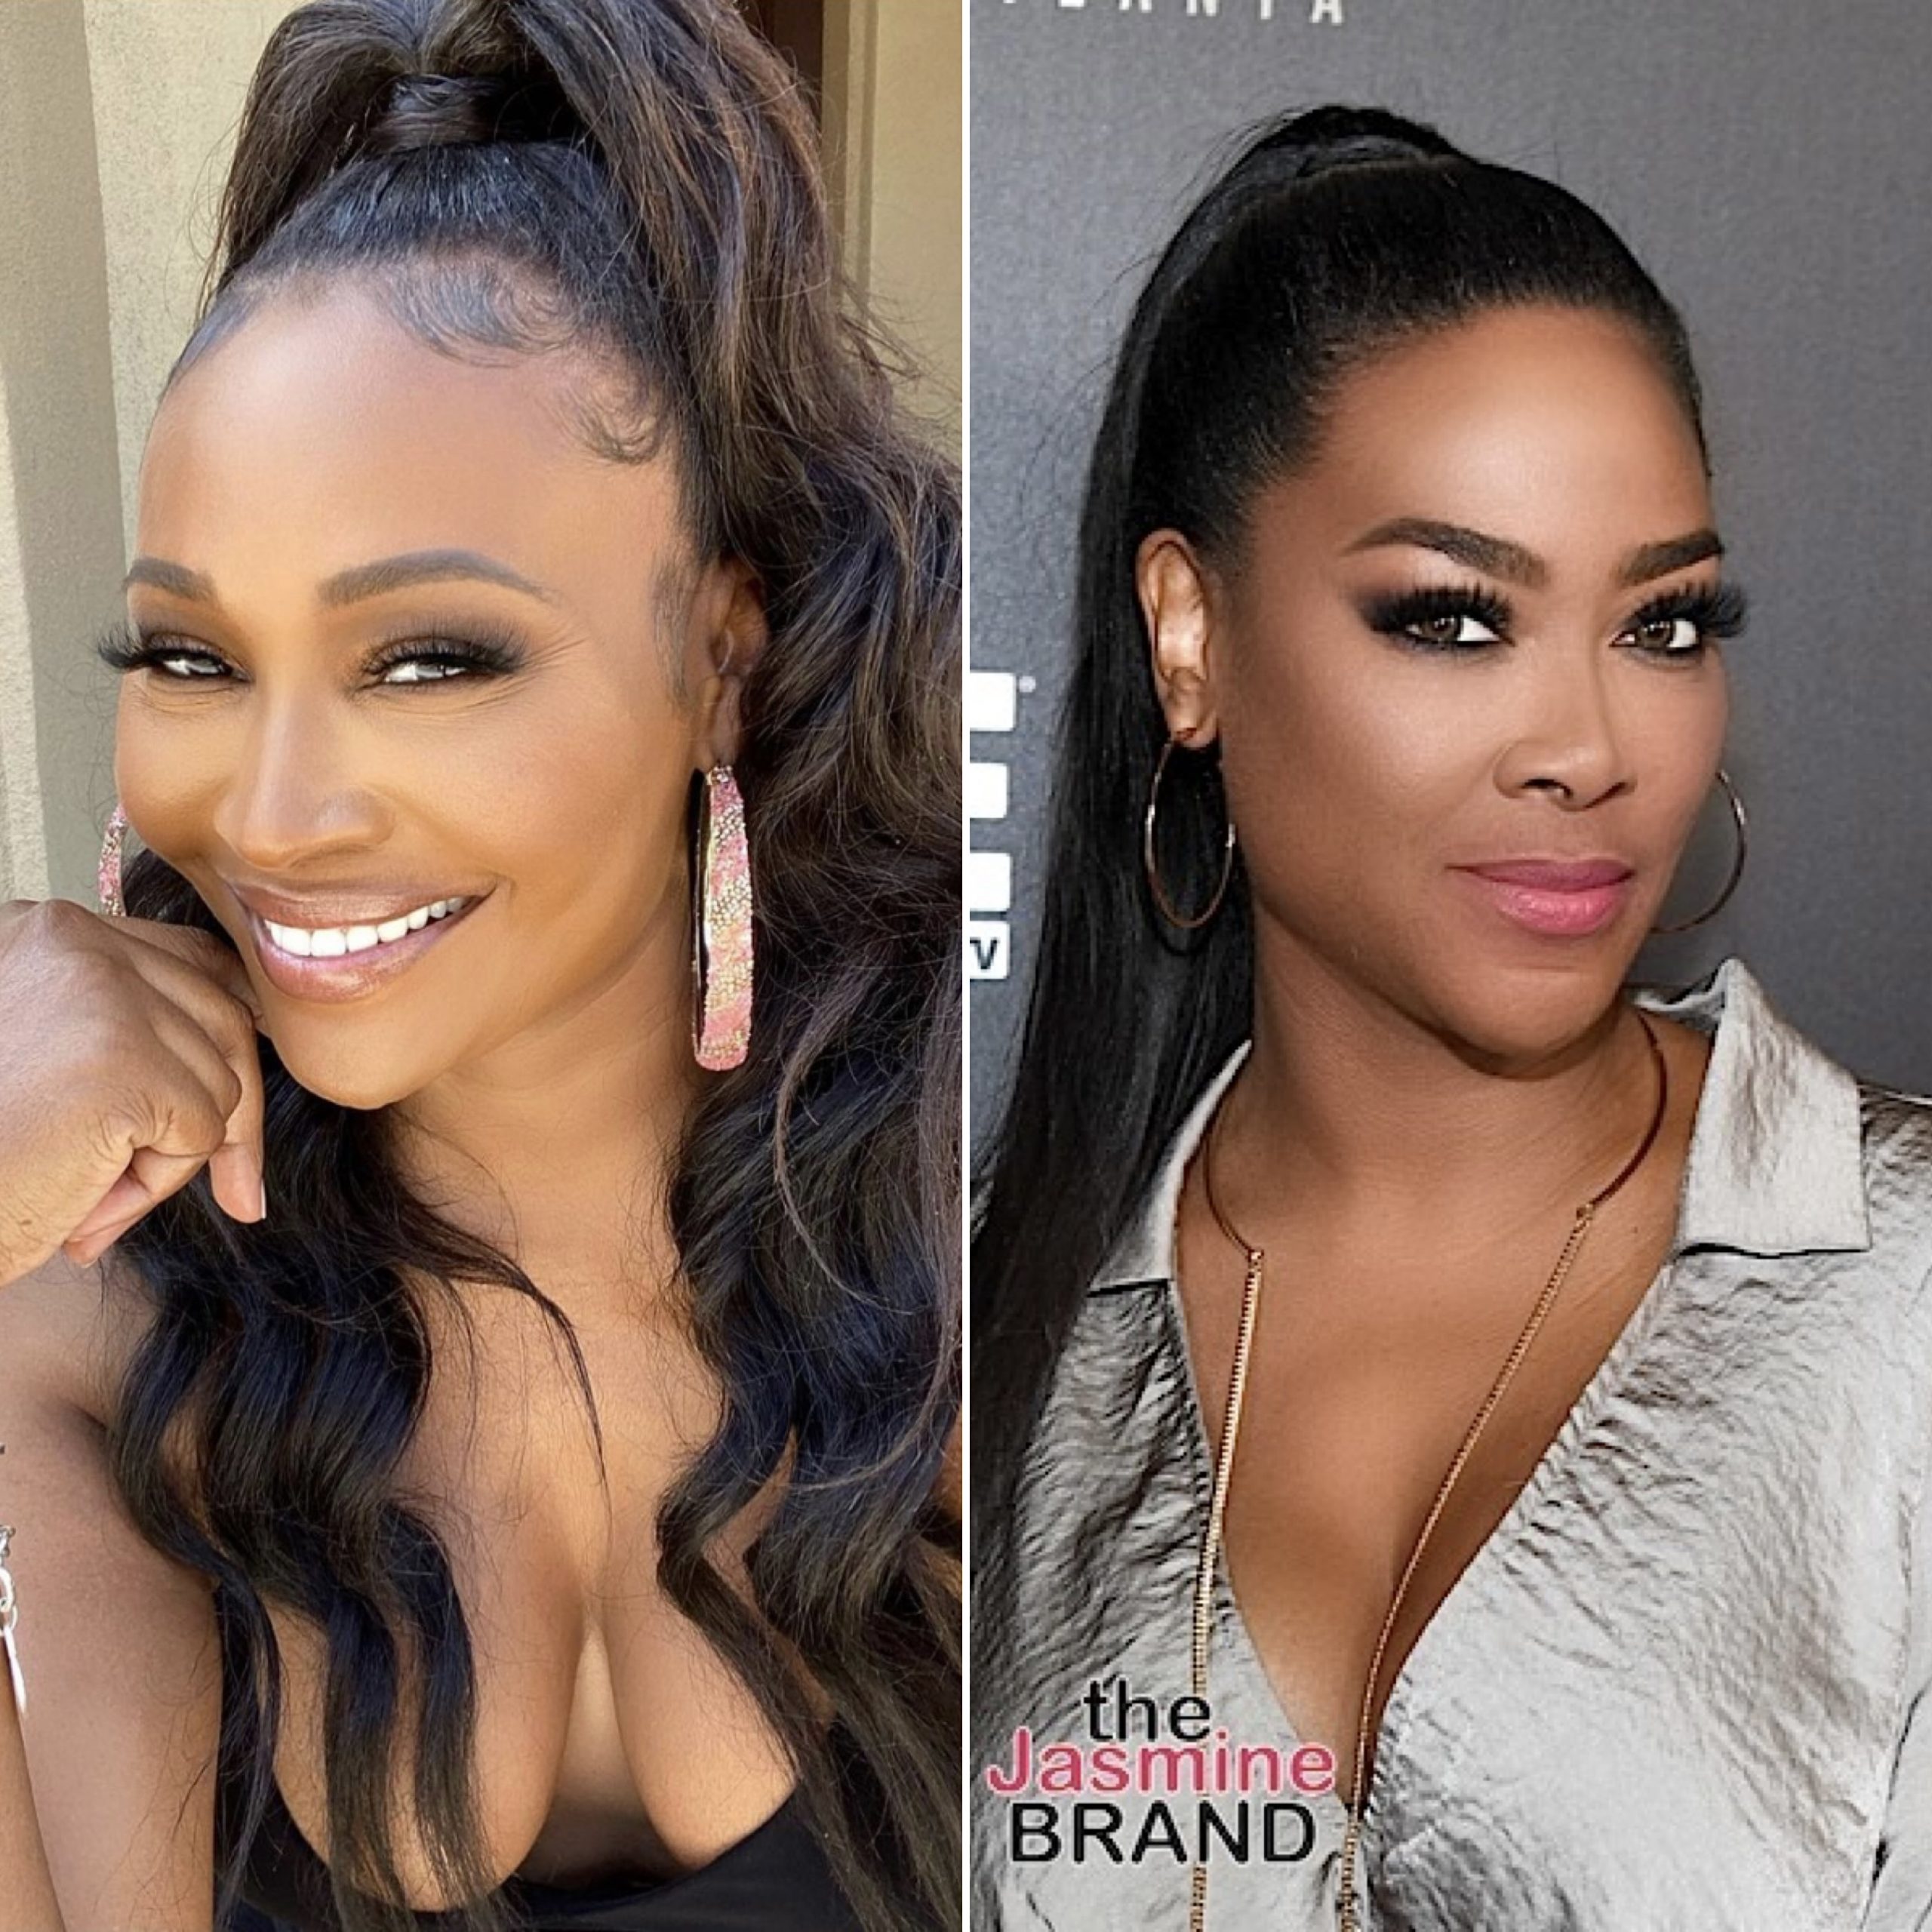 Cynthia Bailey Says Friendship with Kenya Moore Is Not the Same [VIDEO]